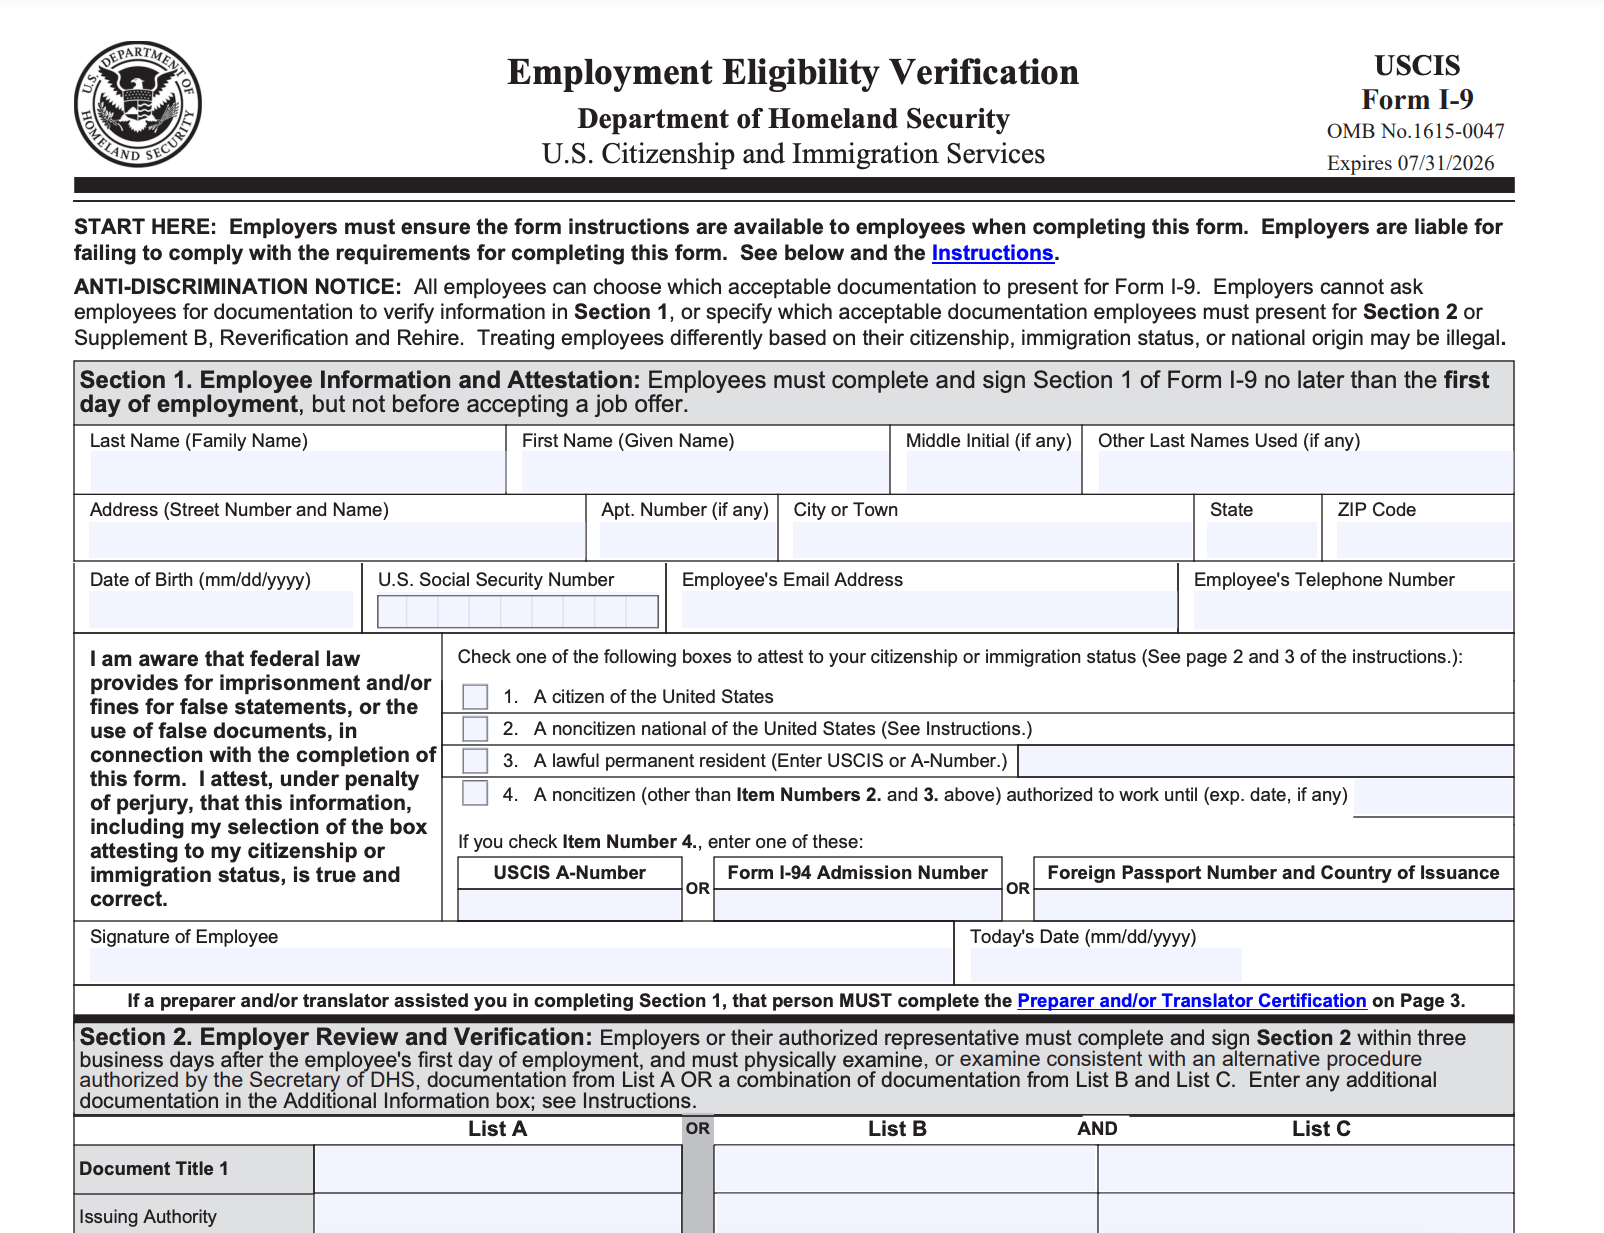 Form I-9, Explained - Boundless regarding What Is An Uscis I-9 Form?